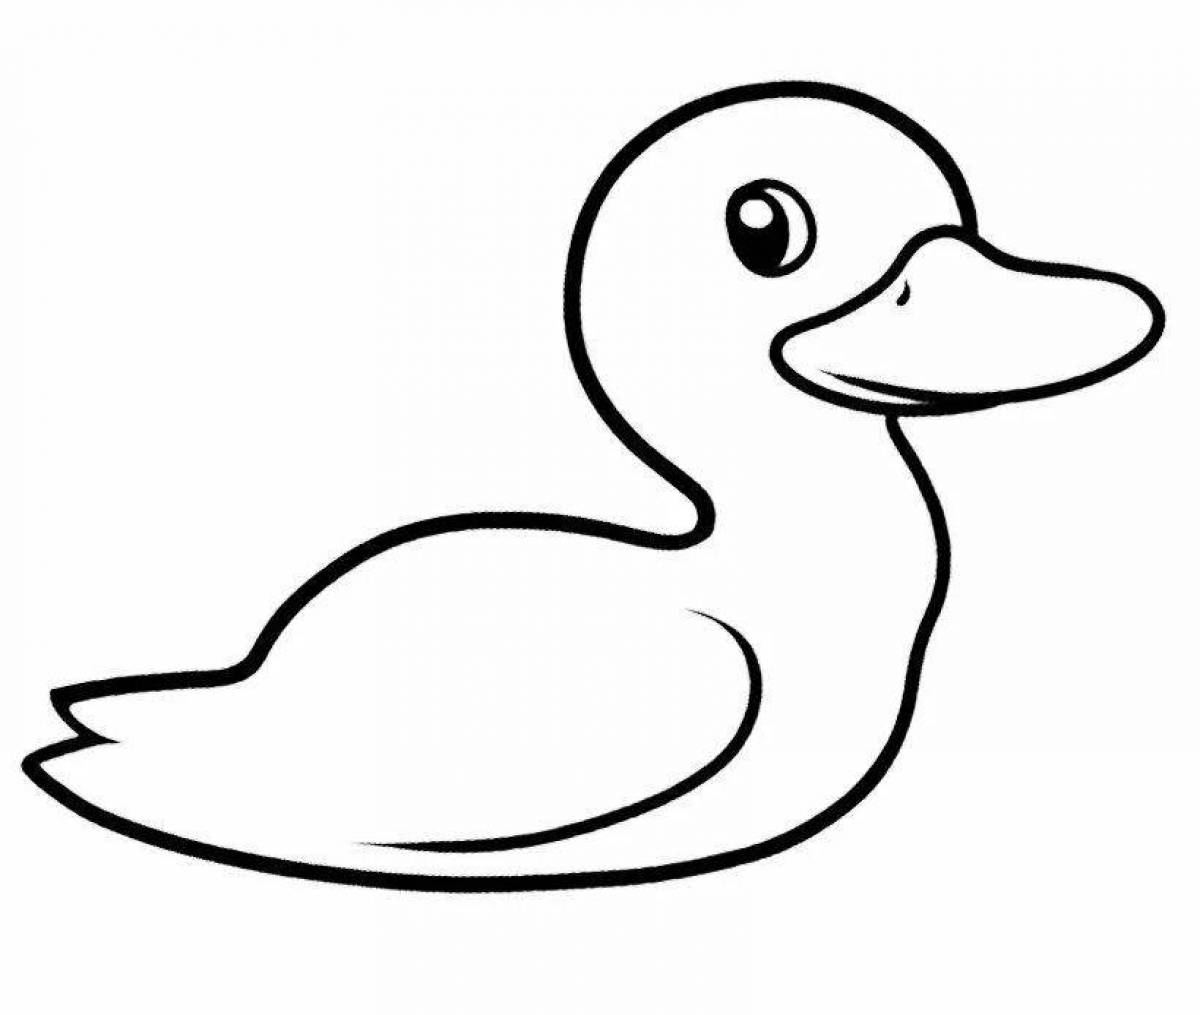 Colorful duck coloring page for kids